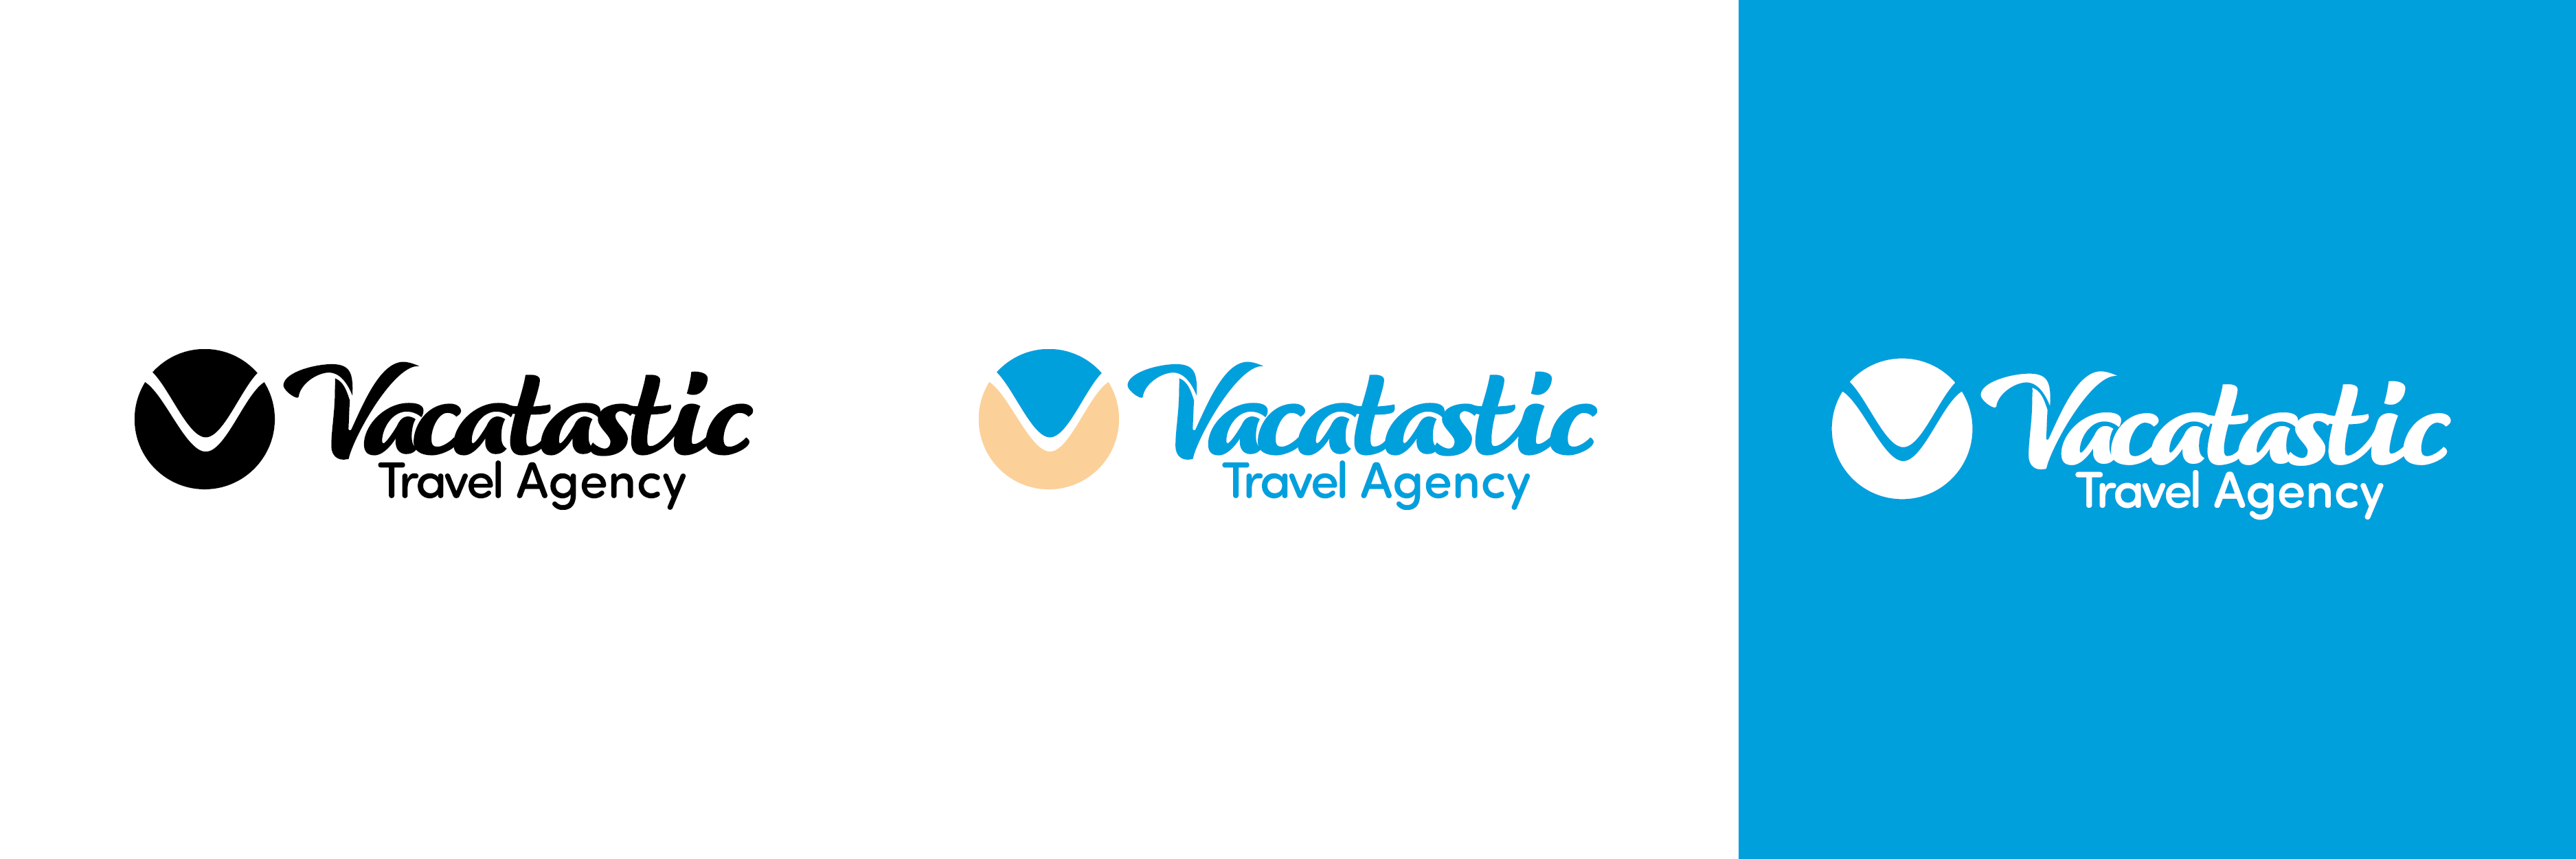 First version of Vacatastic logo